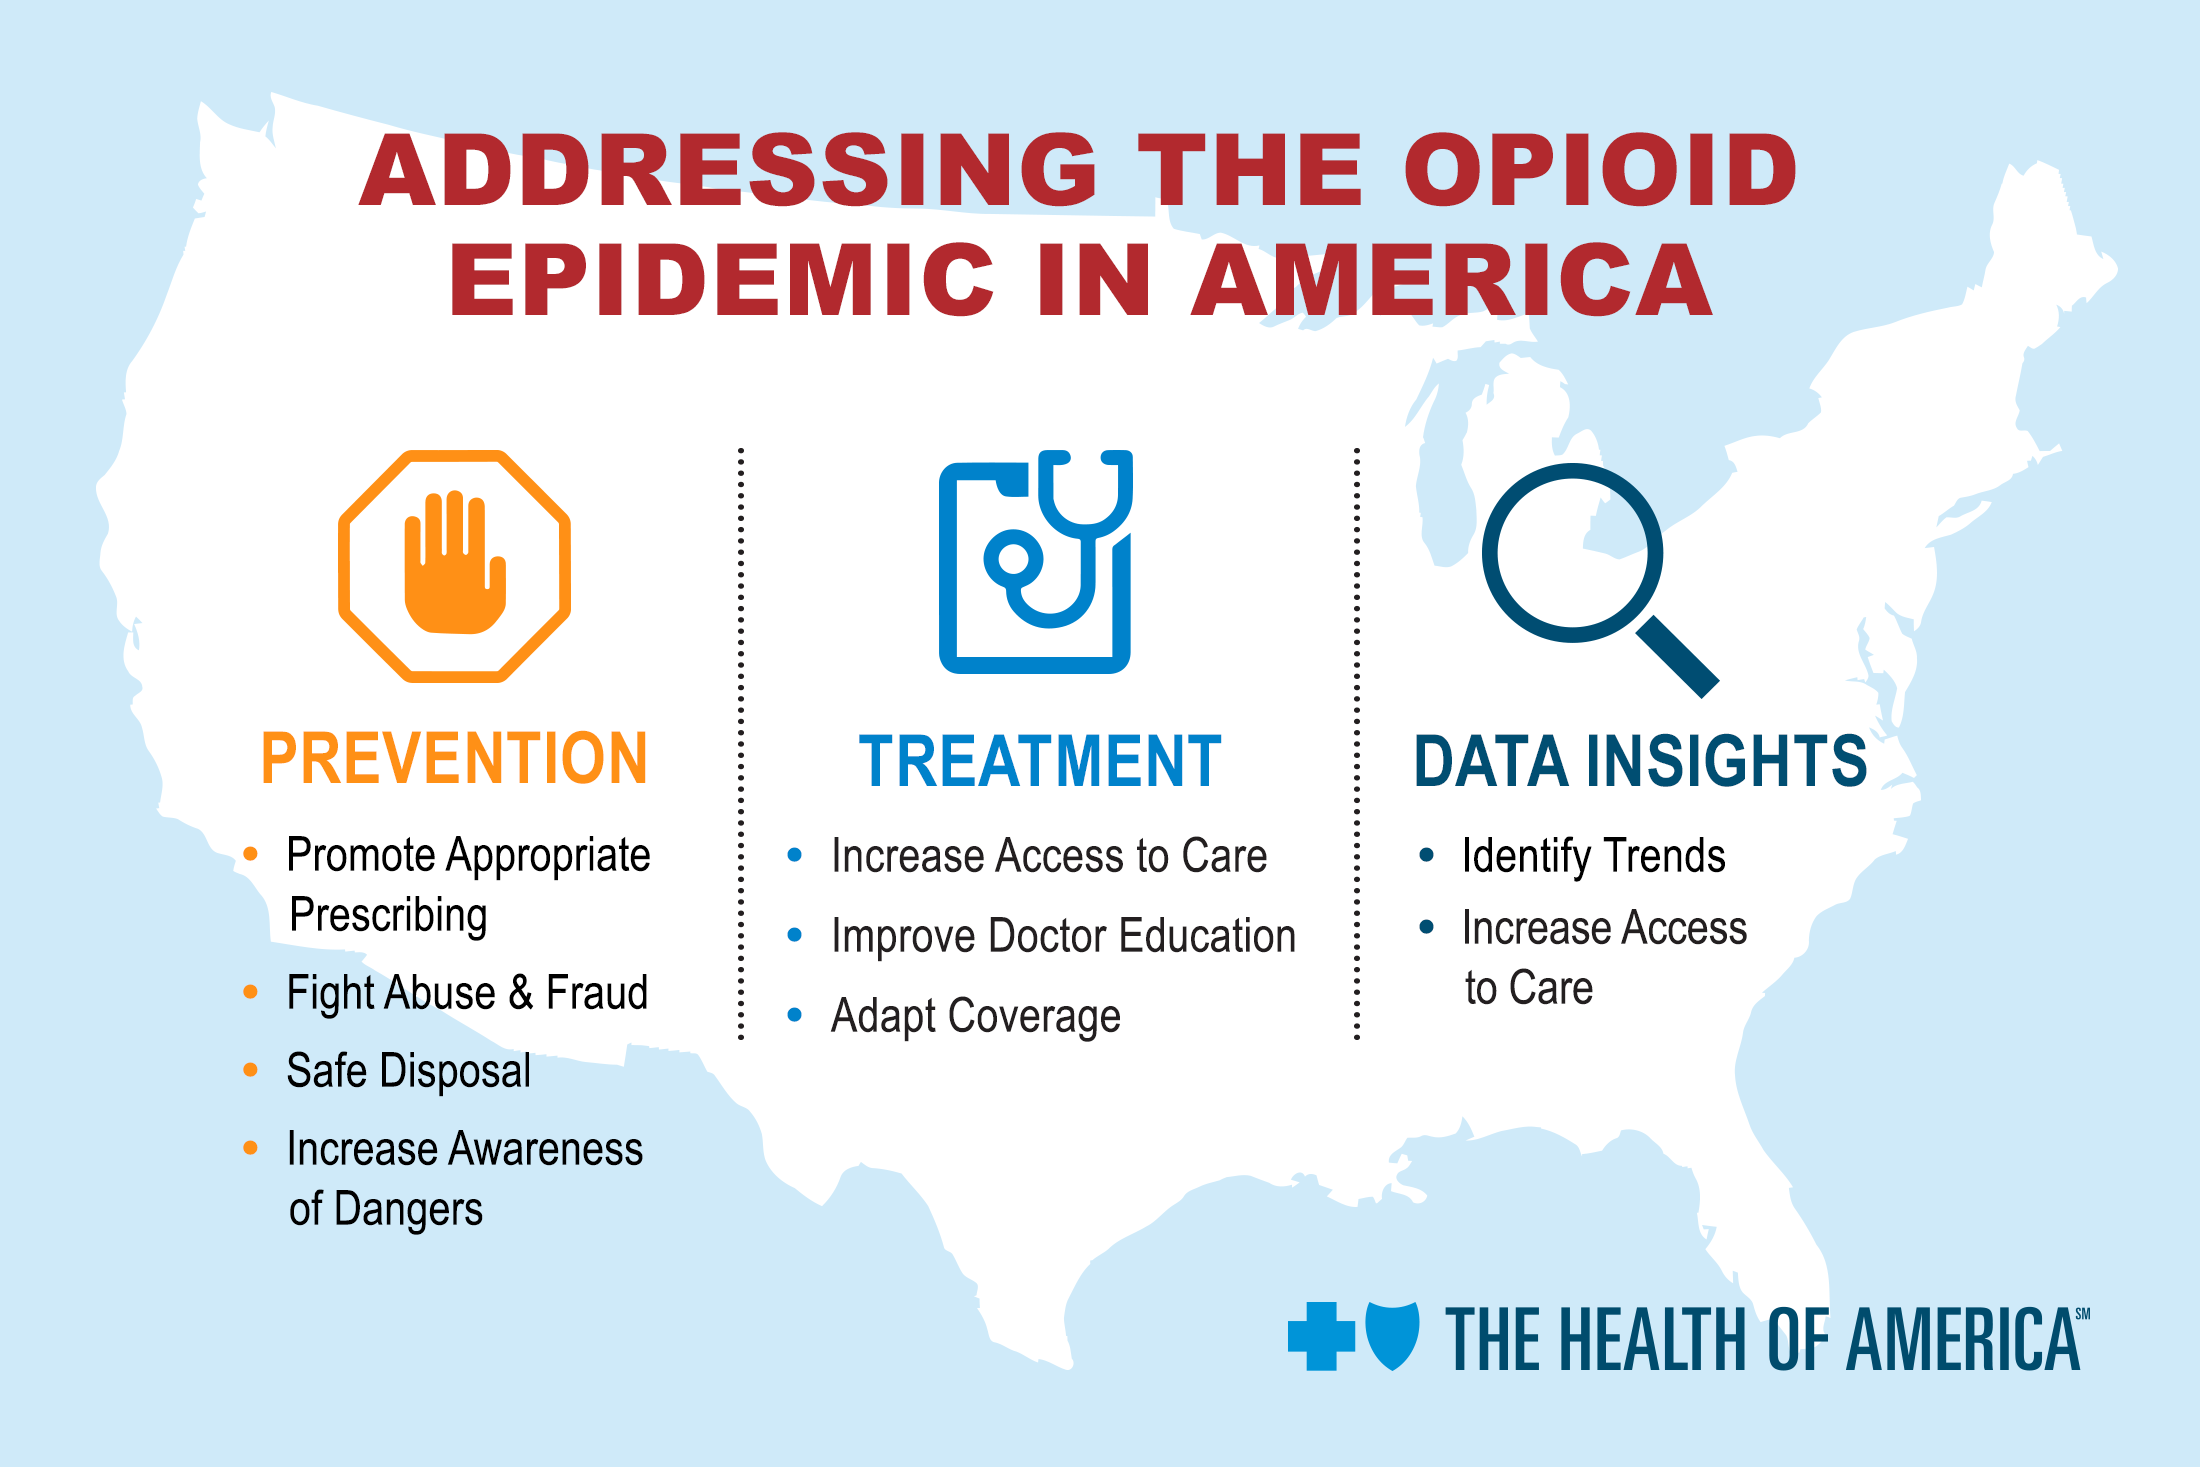 Addressing the opioid epidemic in America